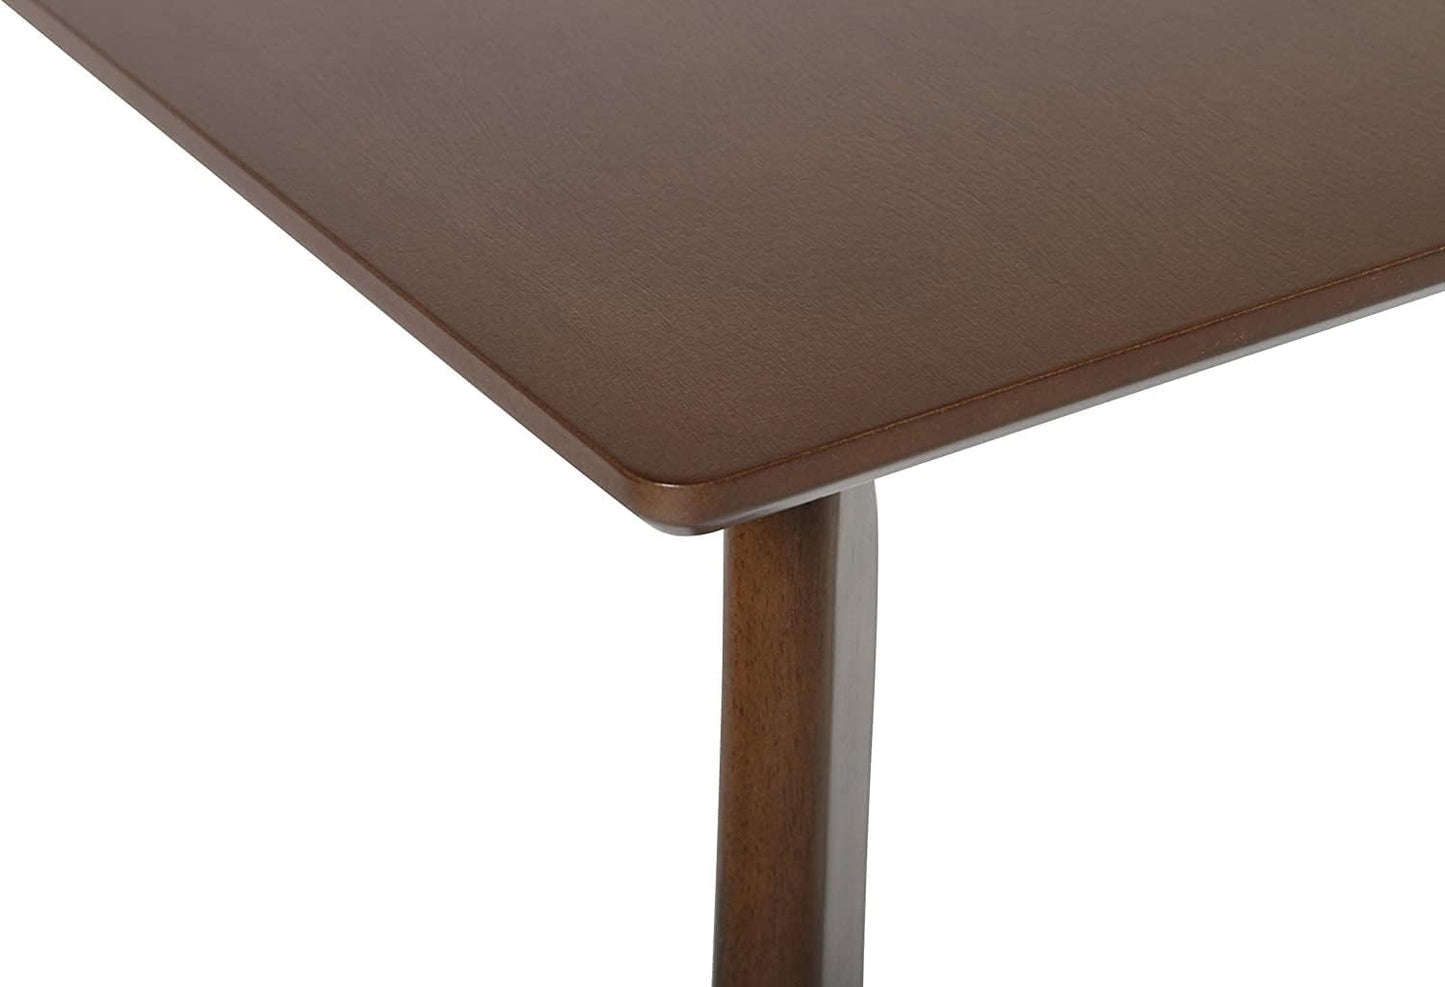 Morocco Rectangle Dining Table, Walnut - LynkHouse